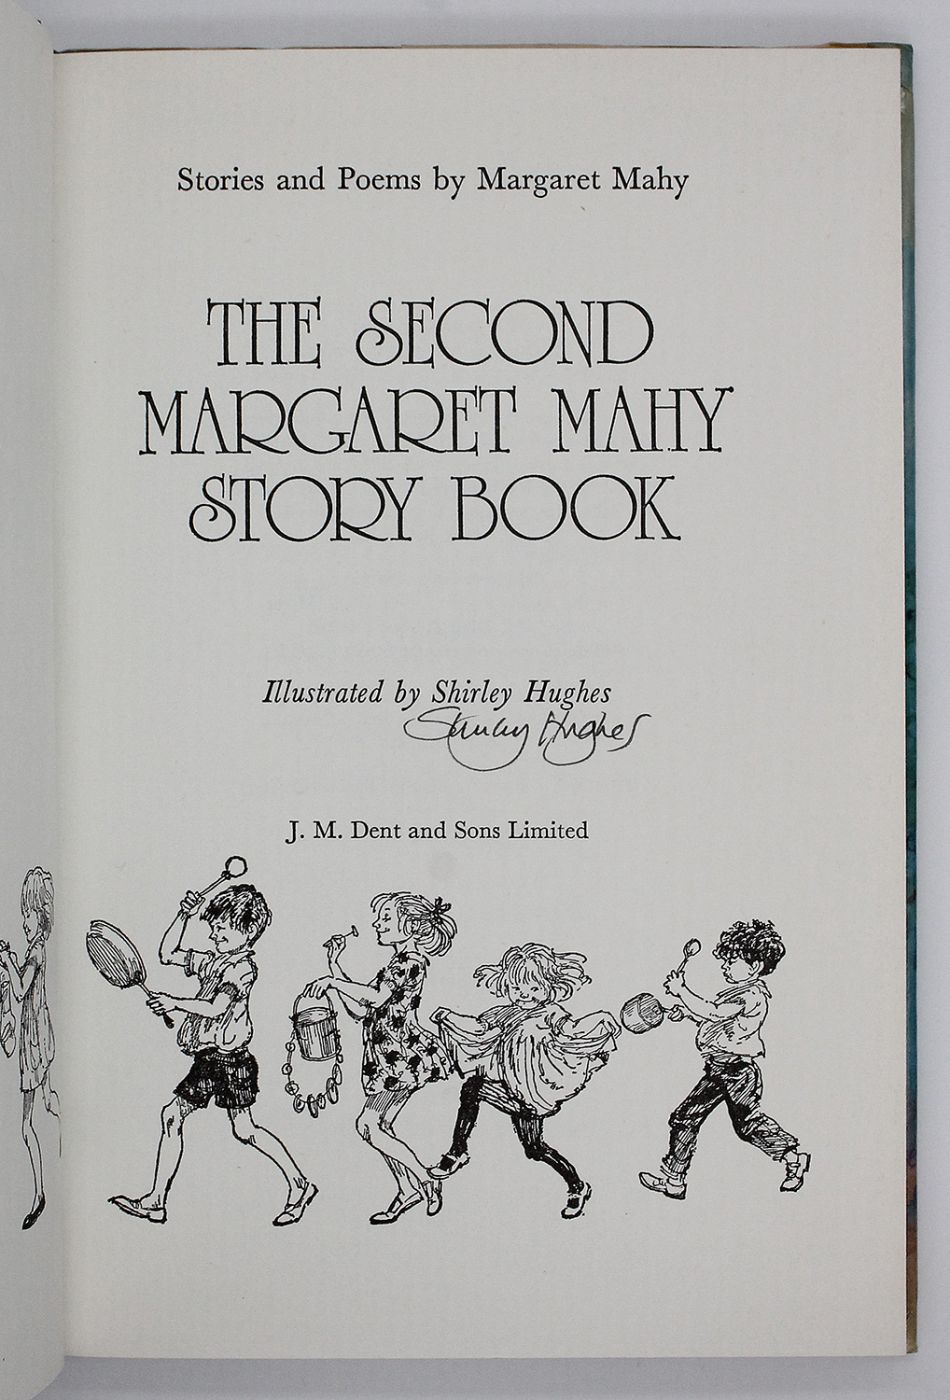 THE SECOND MARGARET MAHY STORY BOOK -  image 2